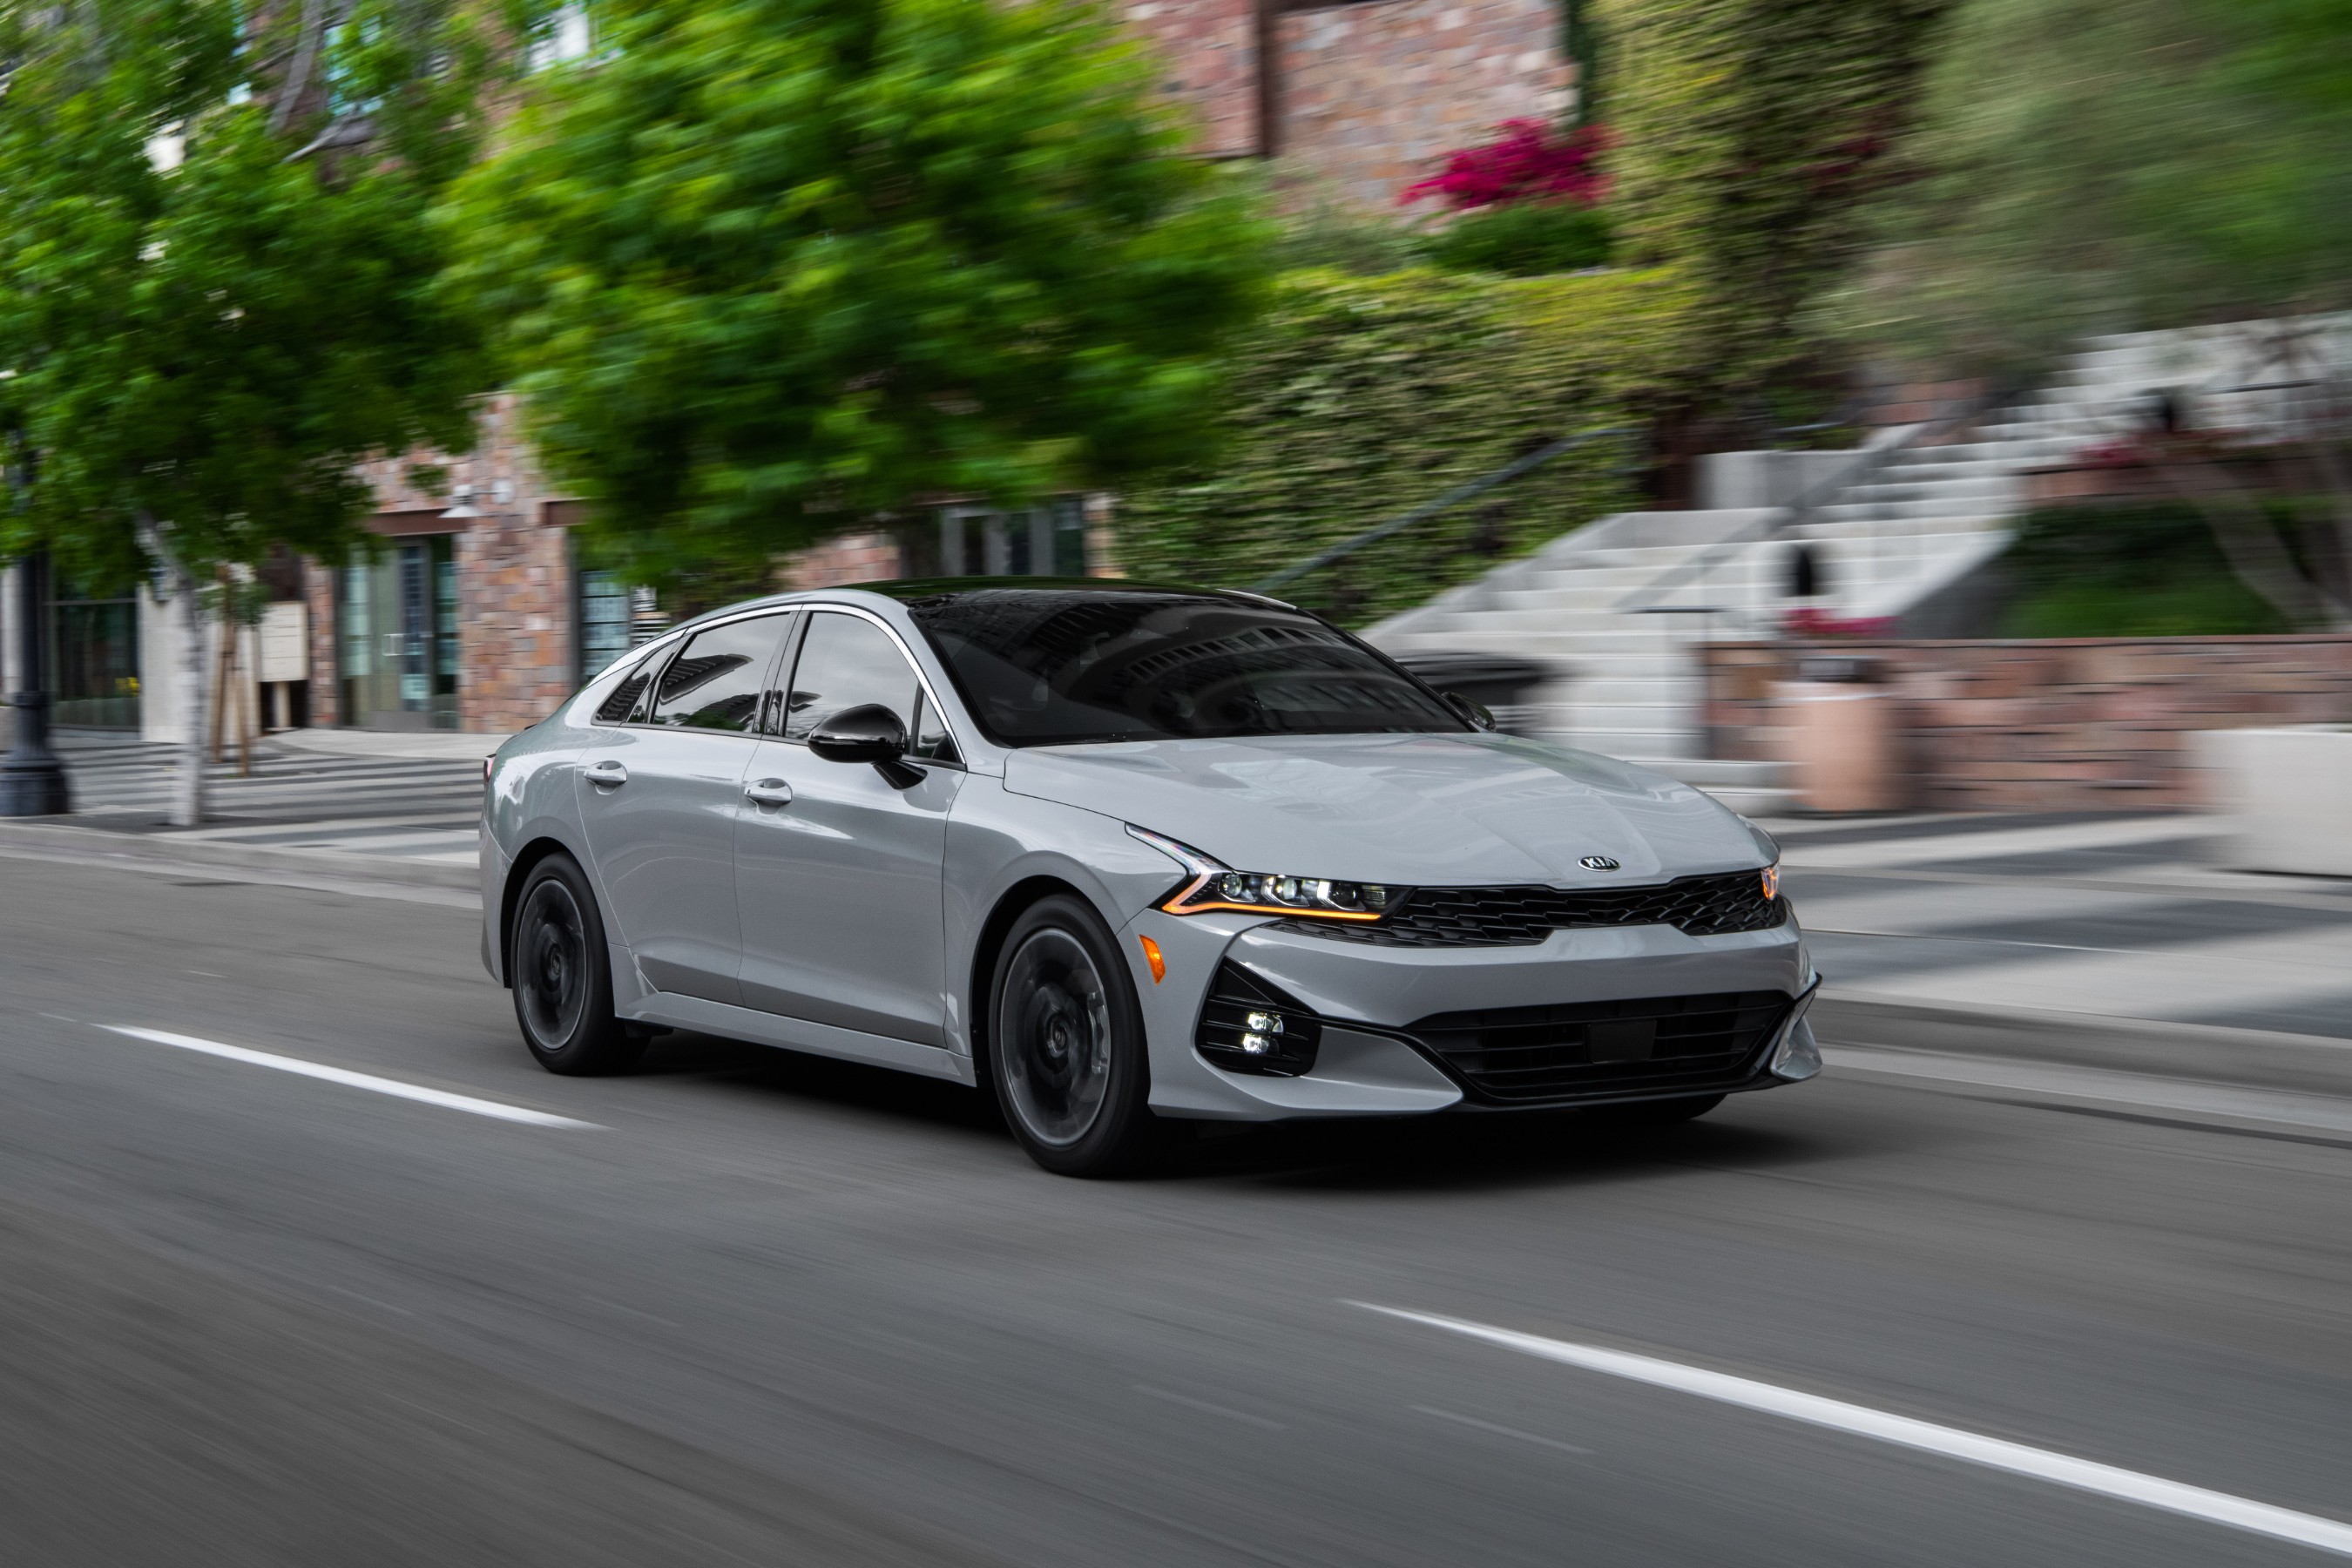 A Kia first for its midsize sedan entry, the all-new K5 will be available with an advanced all-wheel-drive system and is set to go on sale later this year.